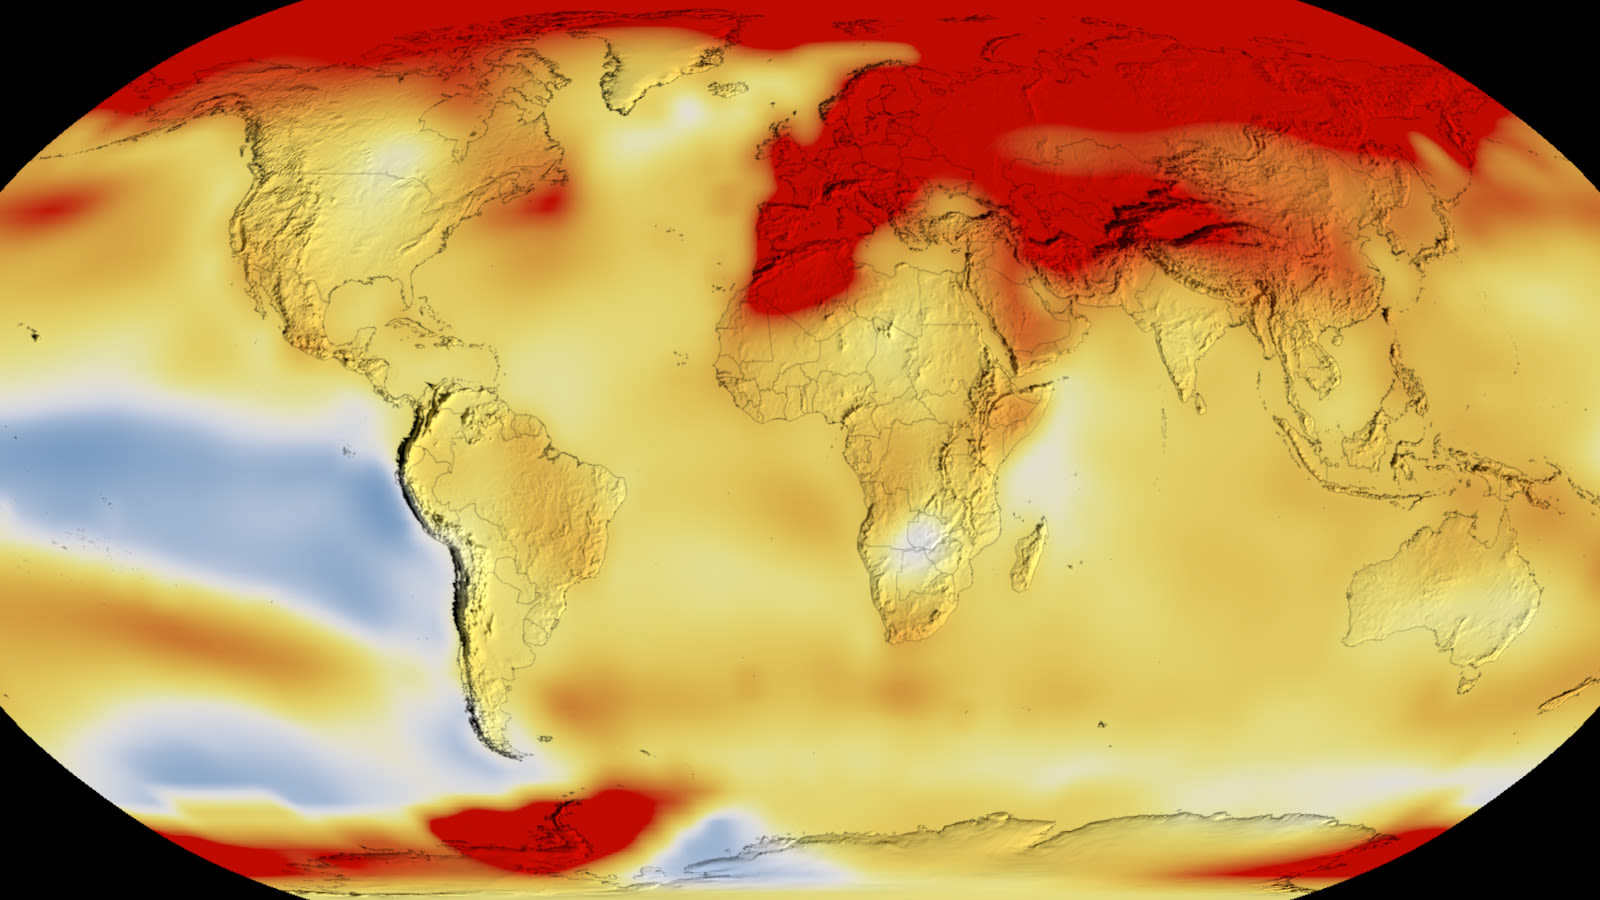 We just had one of the hottest years on record; El Niño could make it worse